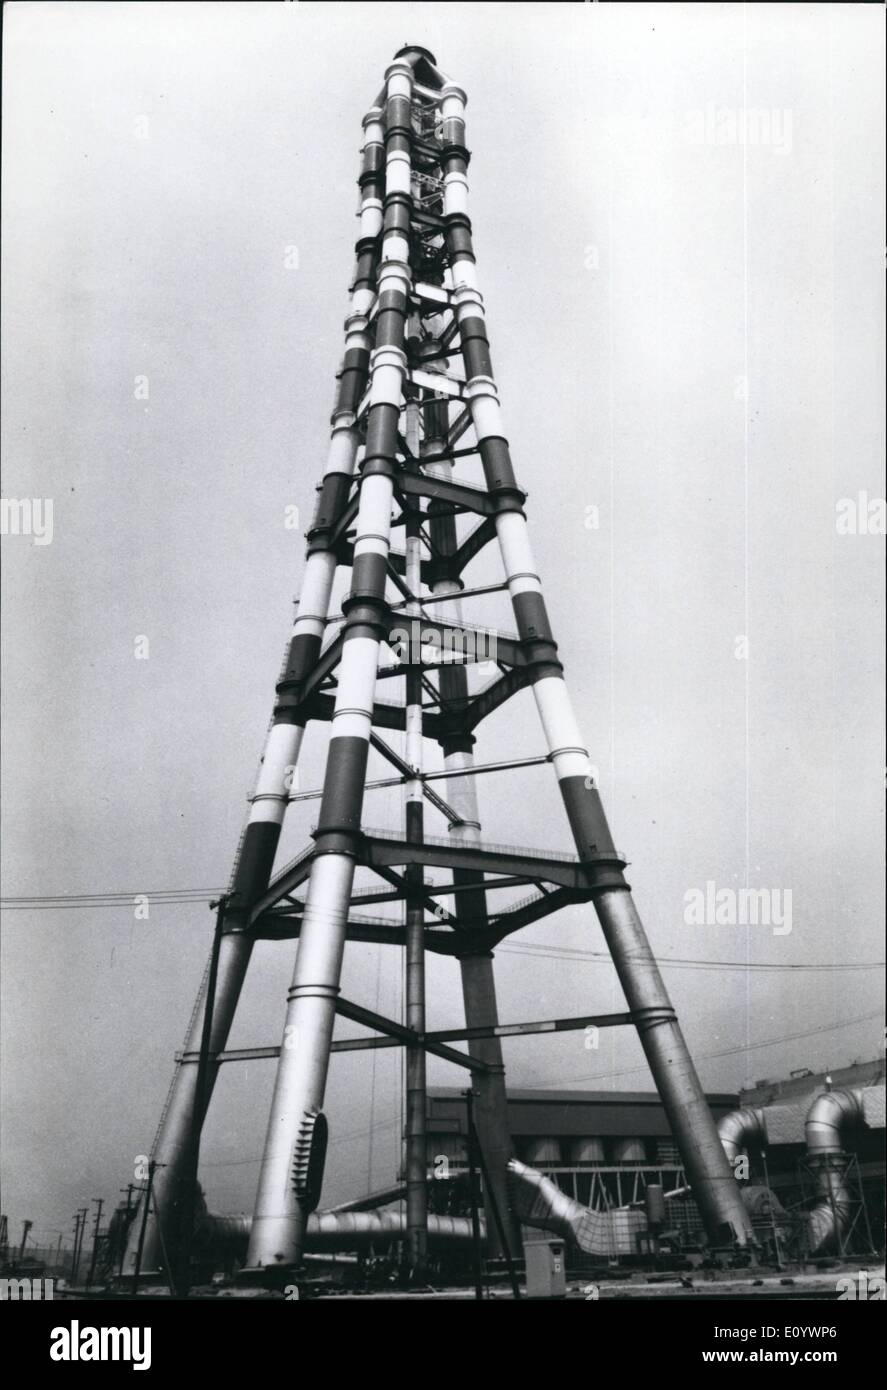 Aug. 08, 1971 - ANTI-EARTHQUAKE CHIMNEY: This four-legged chimney capable of resisting severe earthquakes, and typhoon winds has been erected near the furnaces of the Shin-Nihon Steel Co Works at Kimizu Chiba Prefecture, Japan. The unusual Chimney -220 meters tall, and weighing 2,380 tons is the highest Chimney in the Orient. It was constructed by Mitsubishi Heavy Industries. Stock Photo